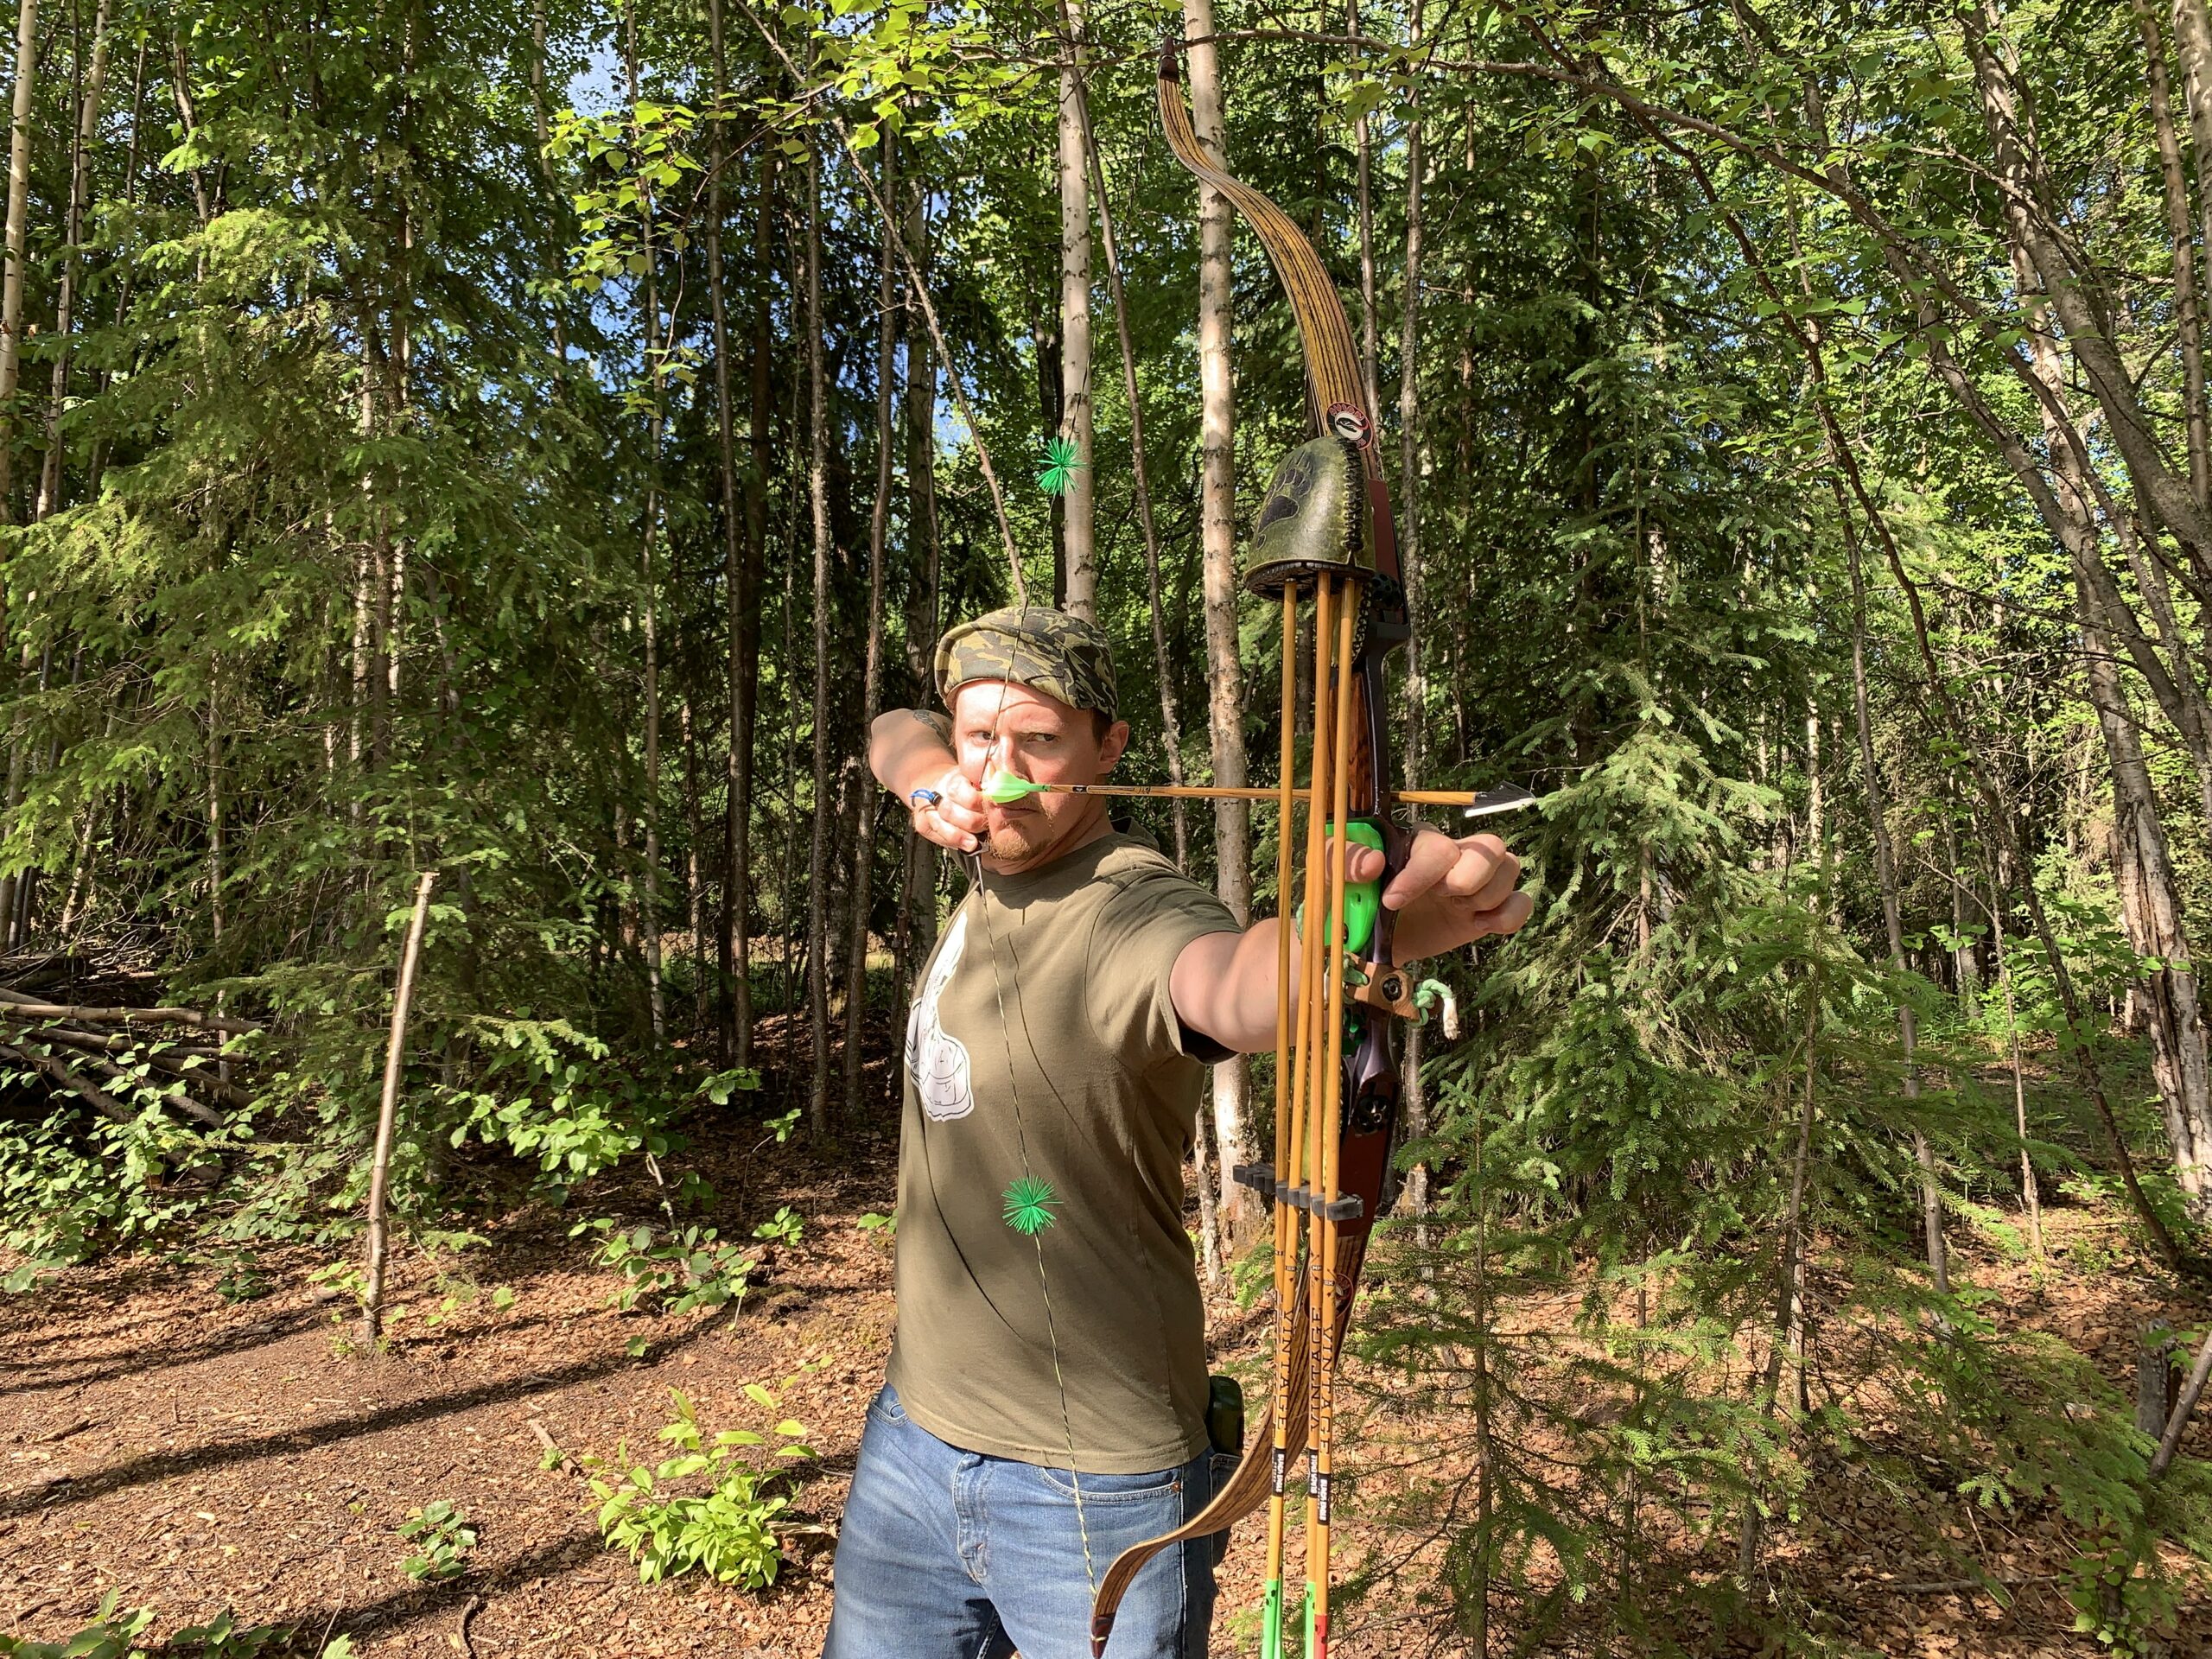 shooting a traditional bow